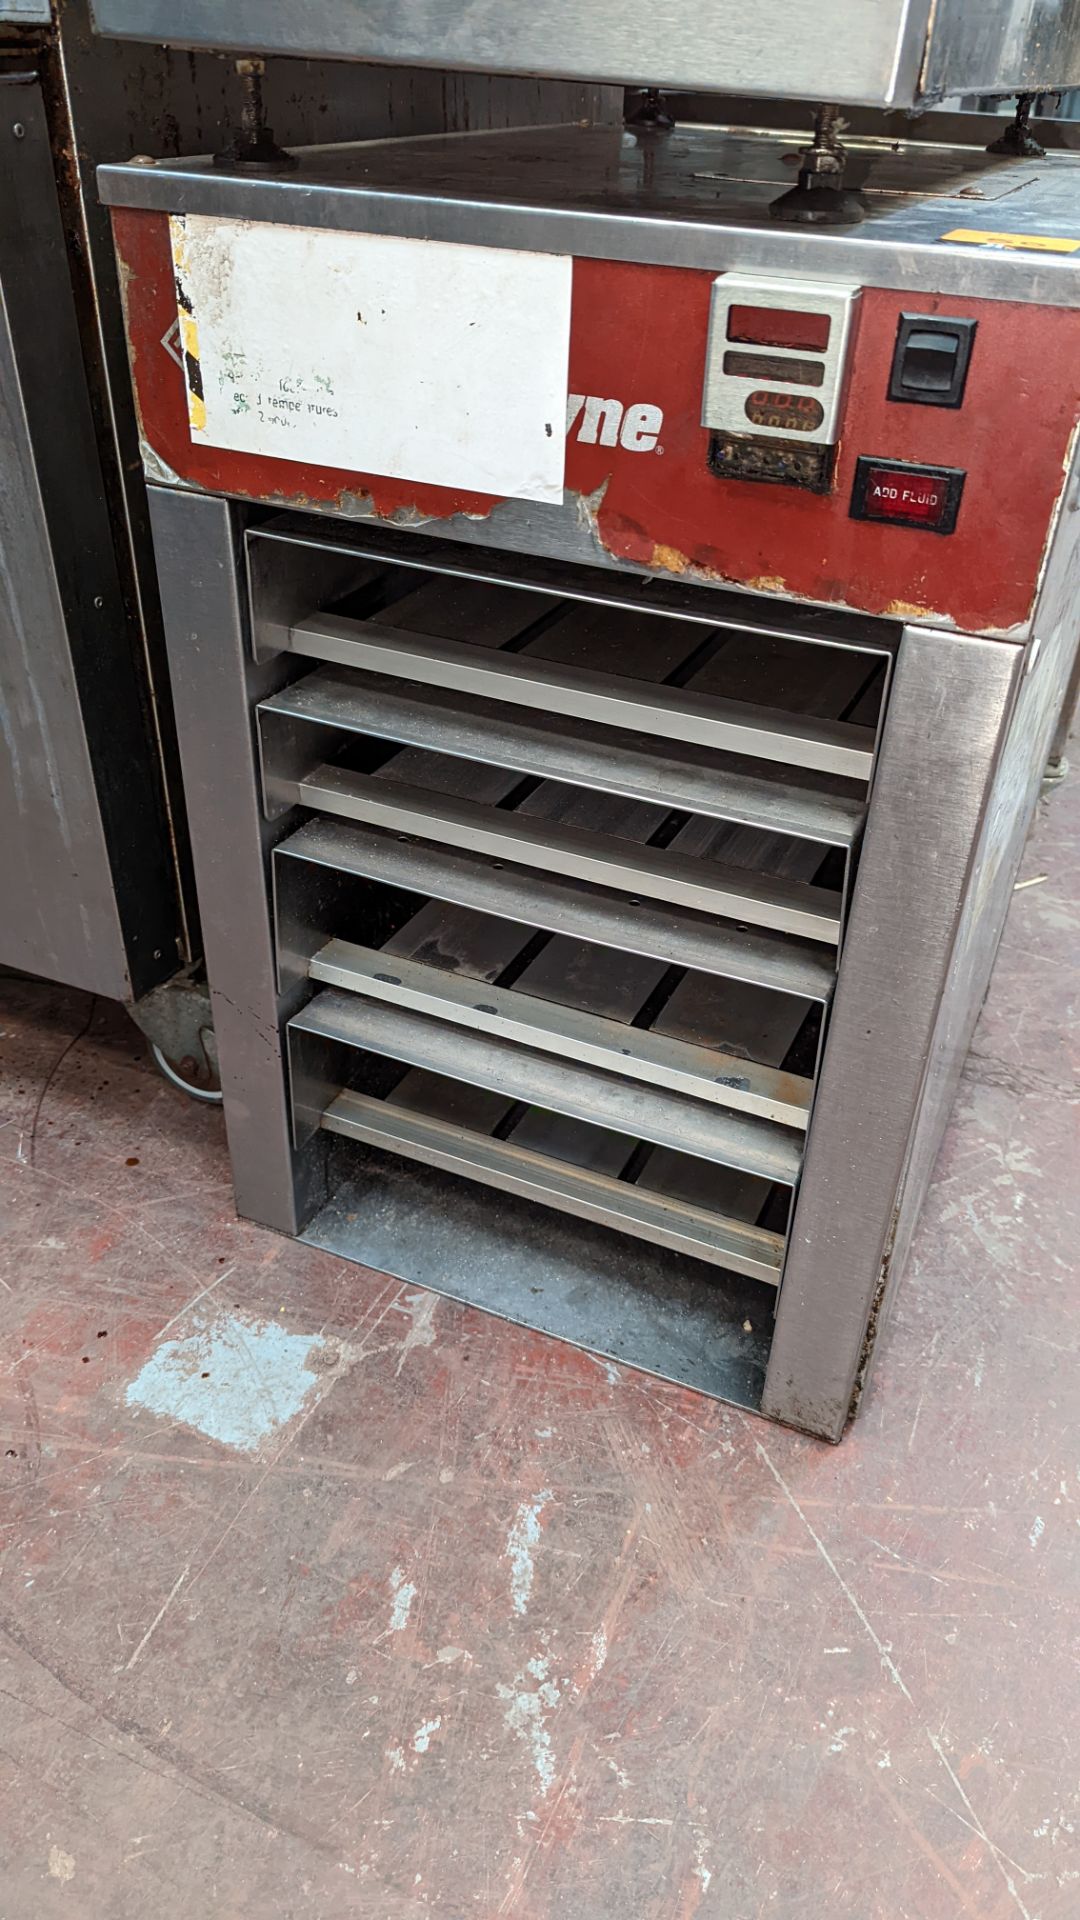 Stainless steel fast food warming pass unit - Image 3 of 5